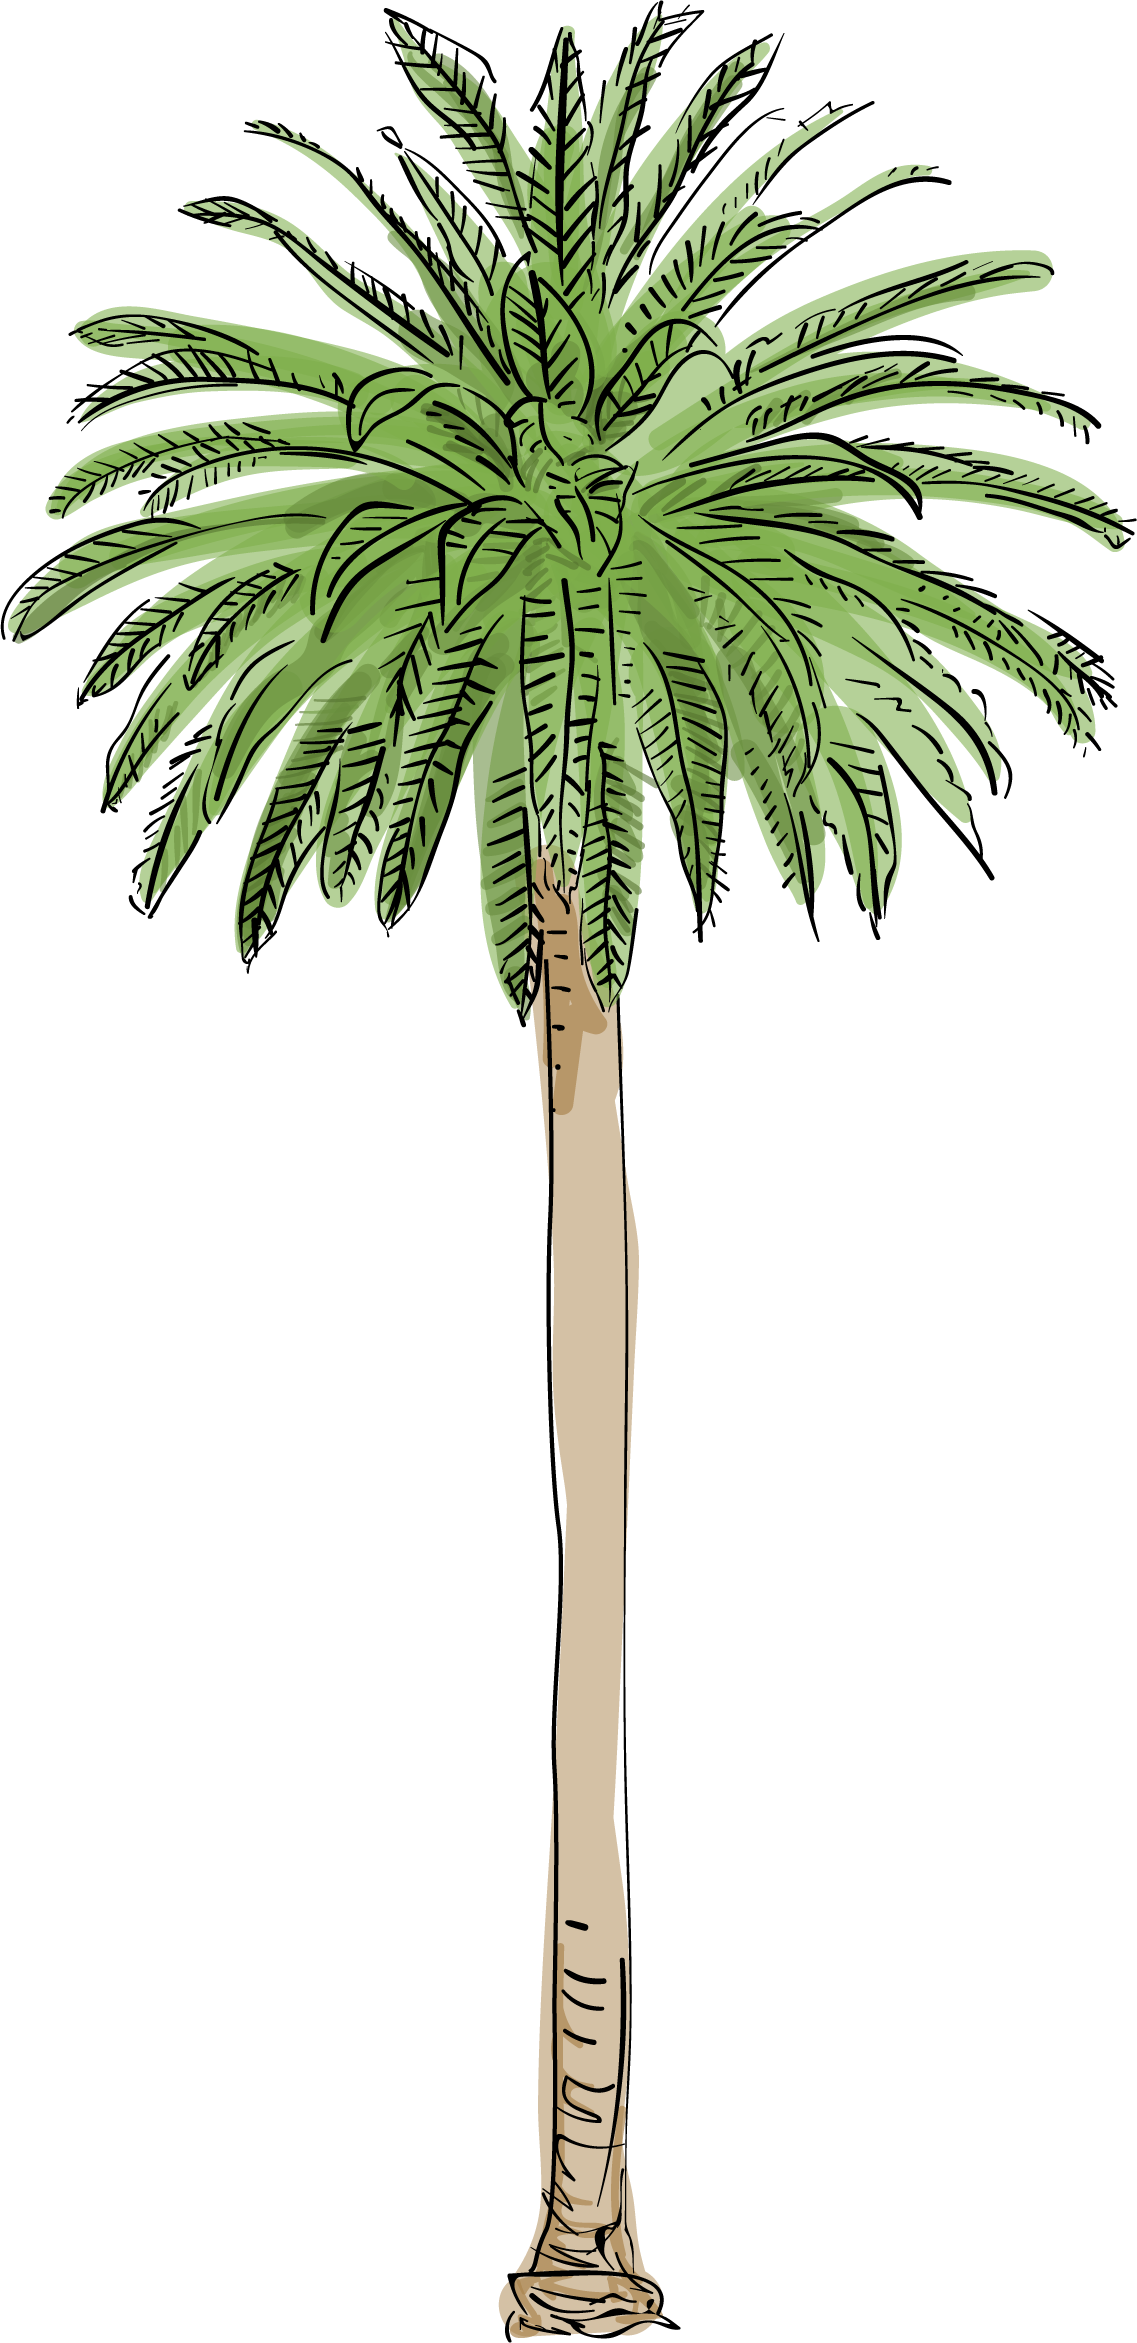 Top Palm Trees Pic L A S Are Dying And It Changing - Palm Tree Fan Shaped Leaves (1137x2343)